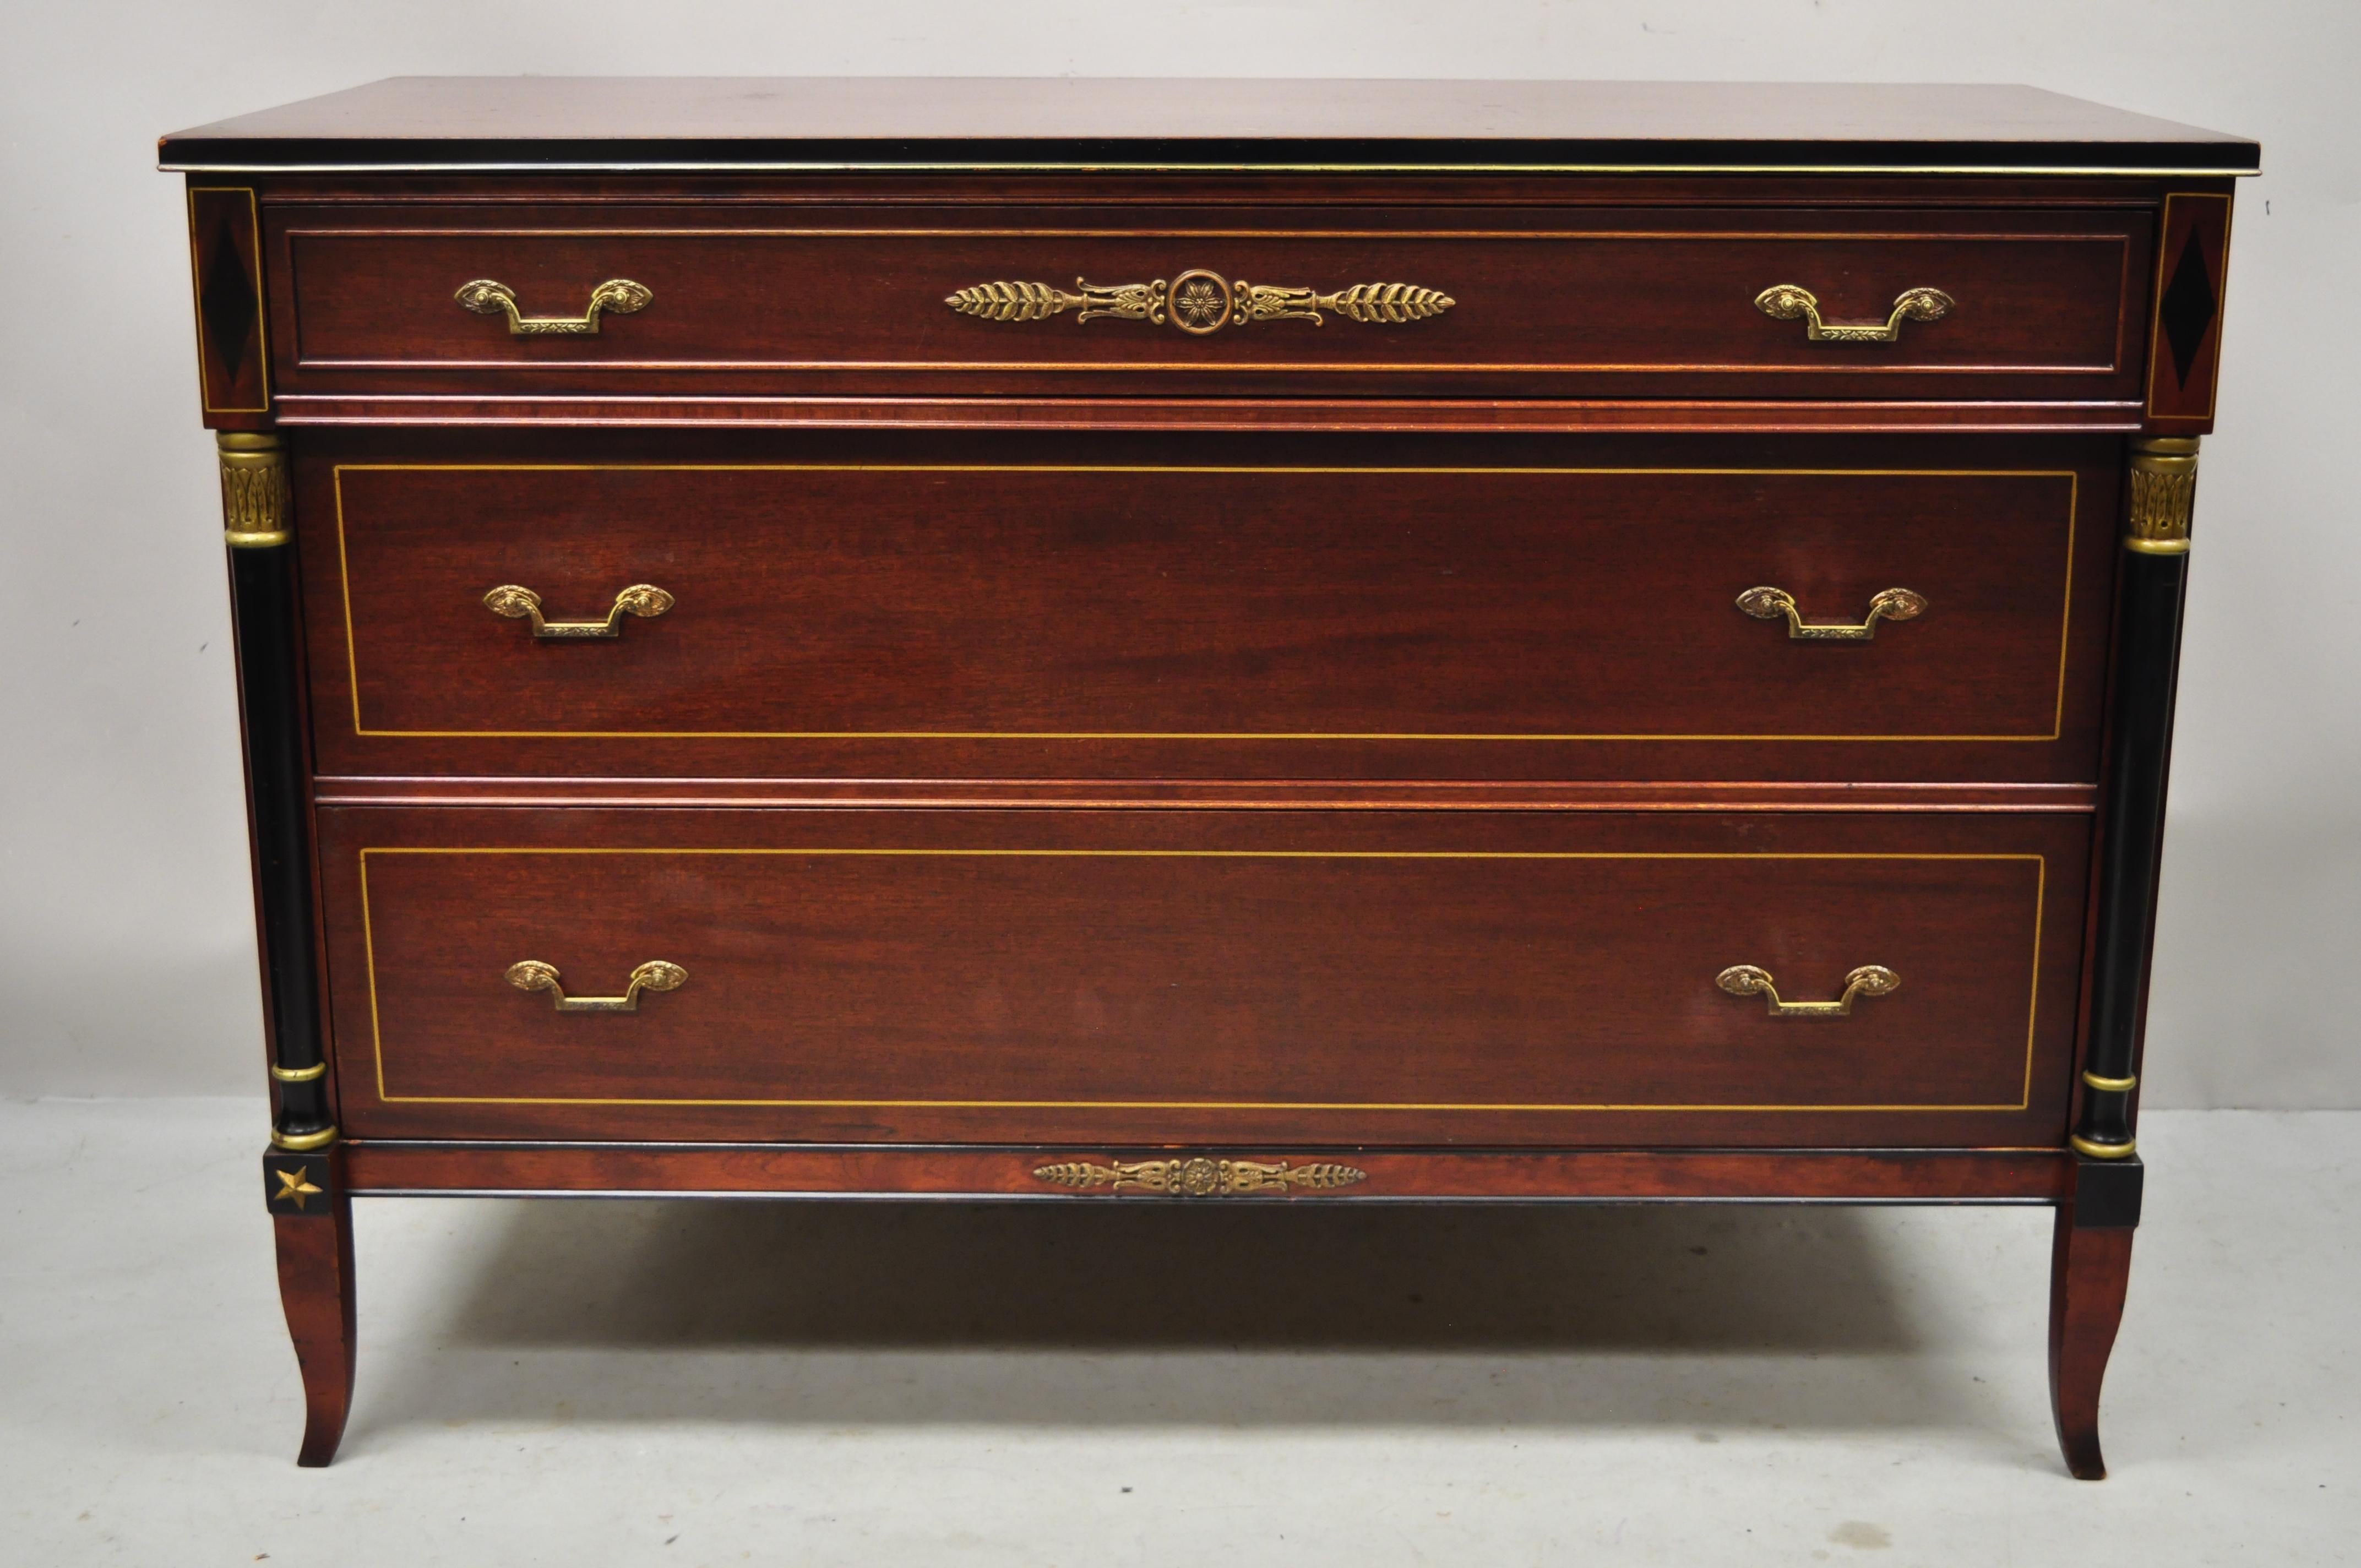 Antique Rway French Empire neoclassical style mahogany 3 drawer dresser chest. Item features black painted accents, beautiful wood grain, nicely carved details, original label, 3 dovetailed drawers, shapely saber legs, solid brass hardware, very